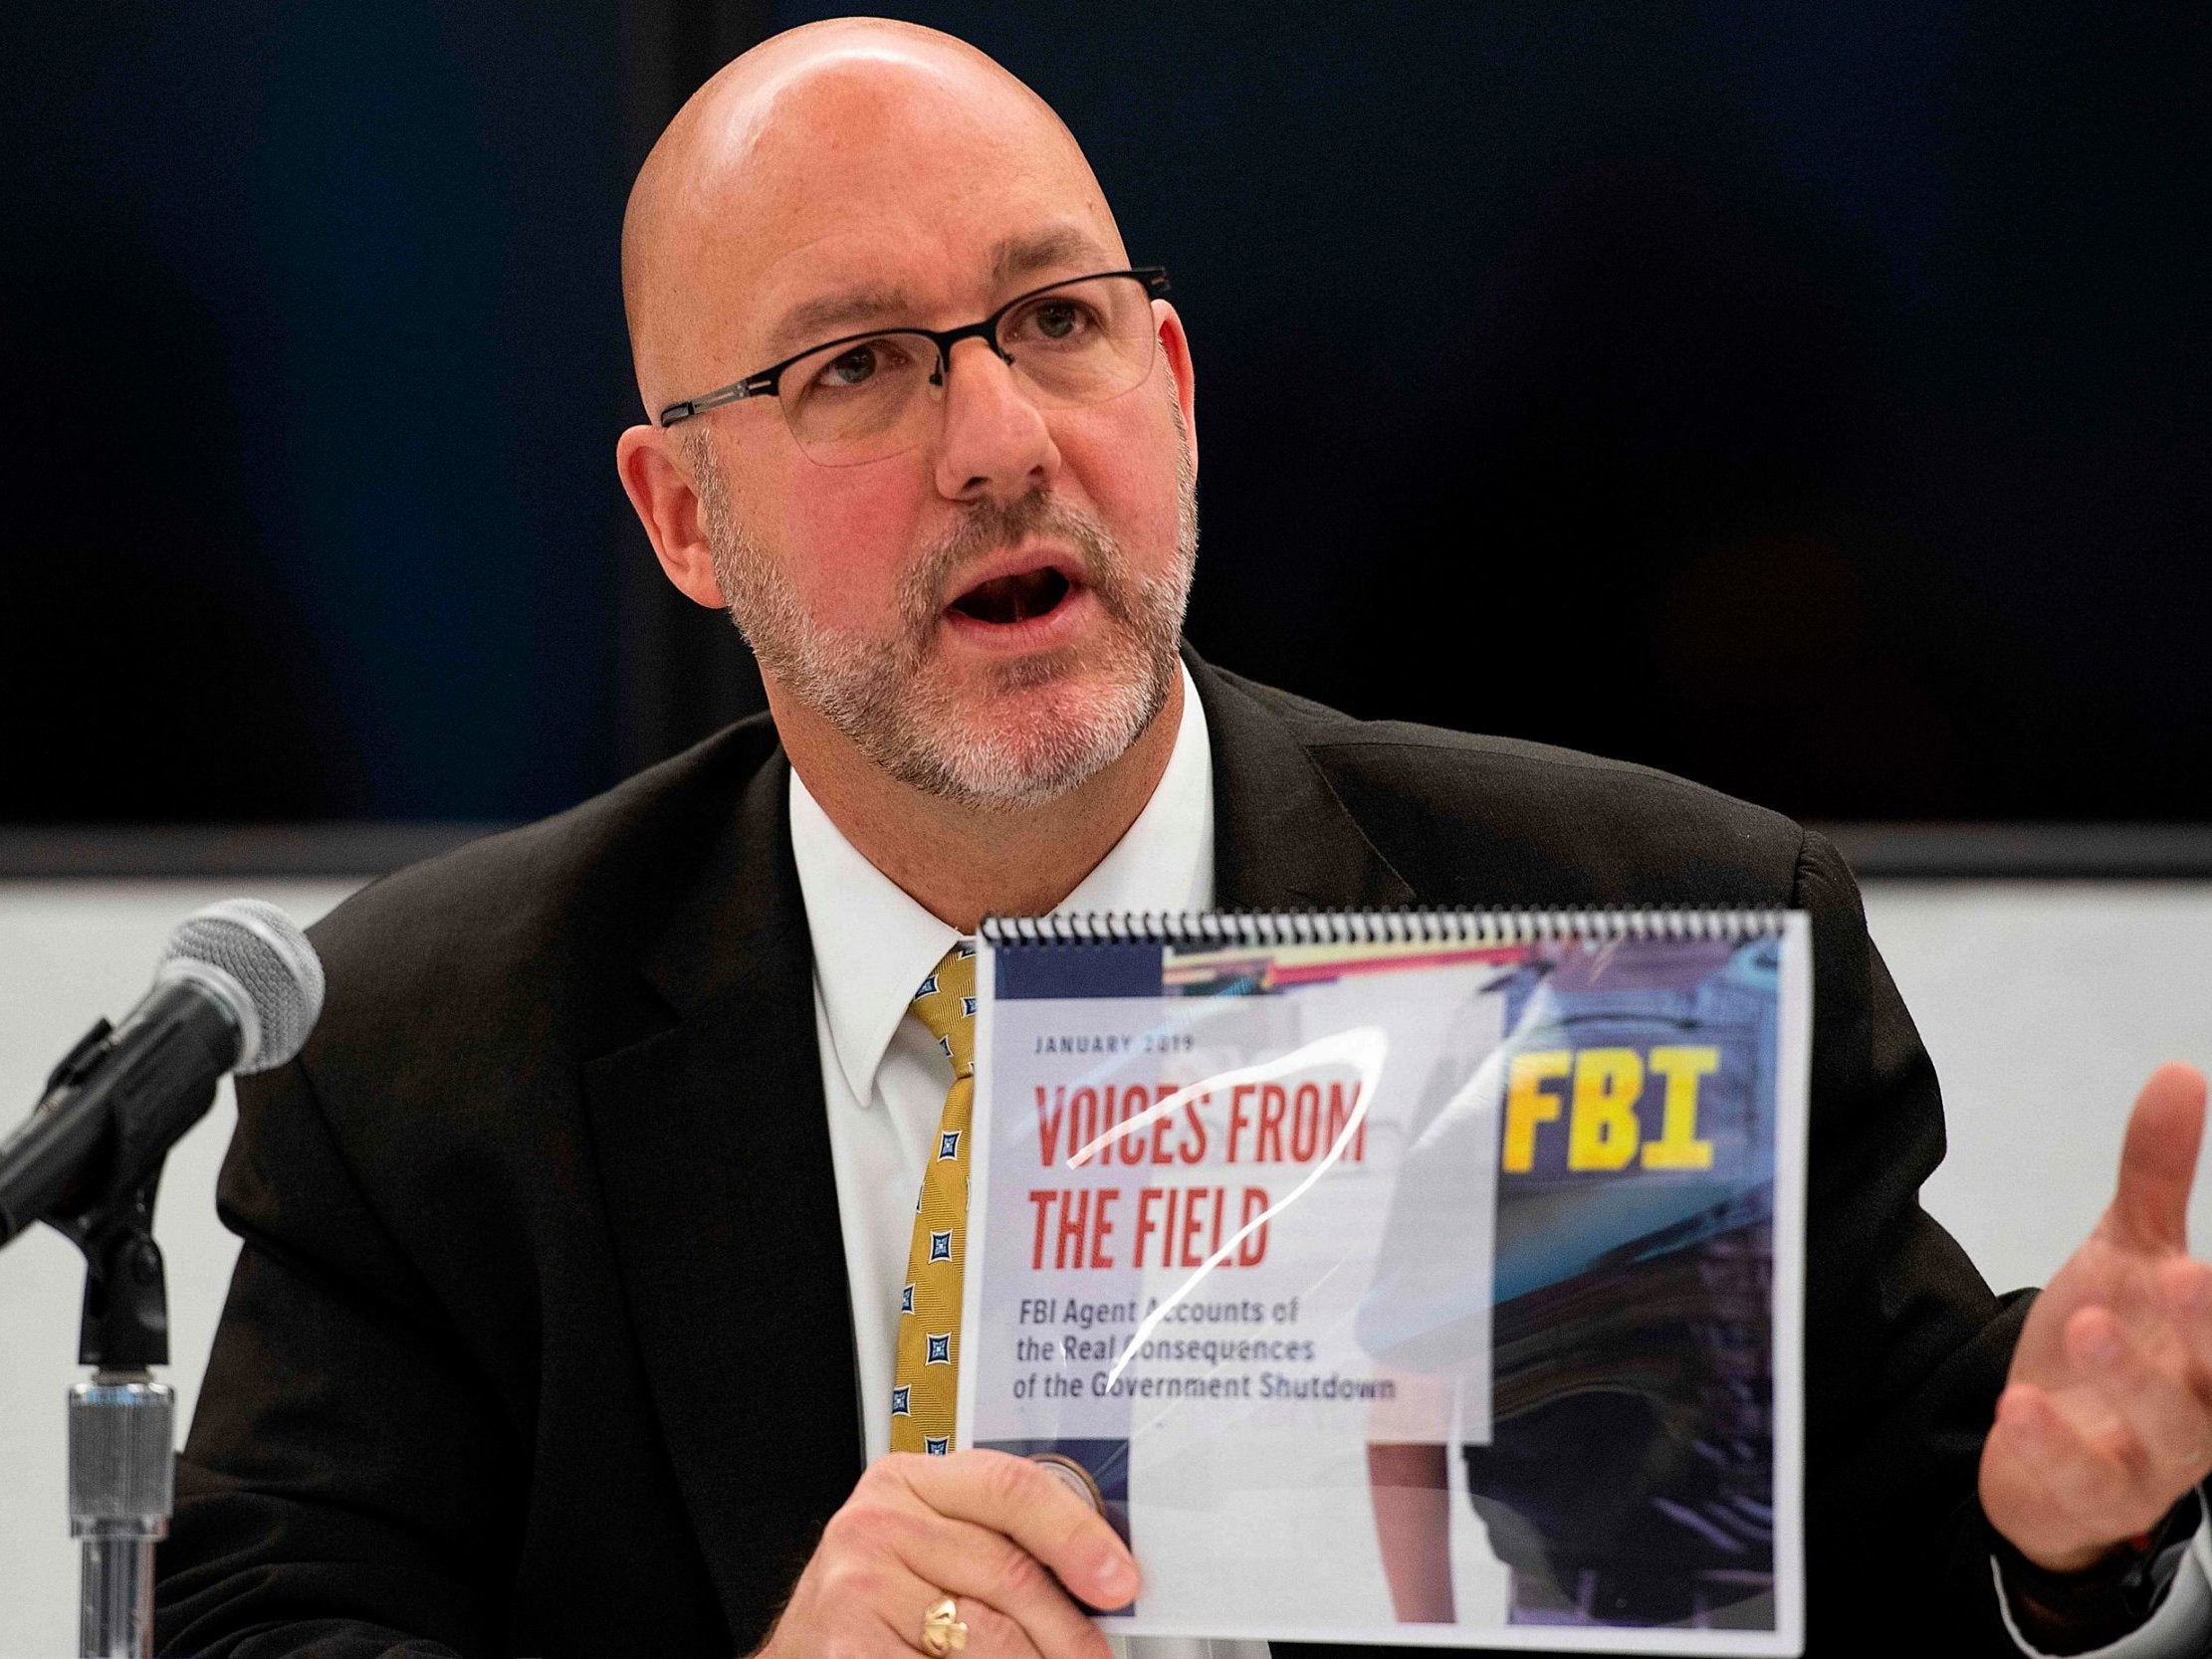 FBI Agents Association’s Thomas O’Connor holds up an FBI report ‘Voices From the Field’ giving examples of how the government shutdown is undermining its work (Getty)